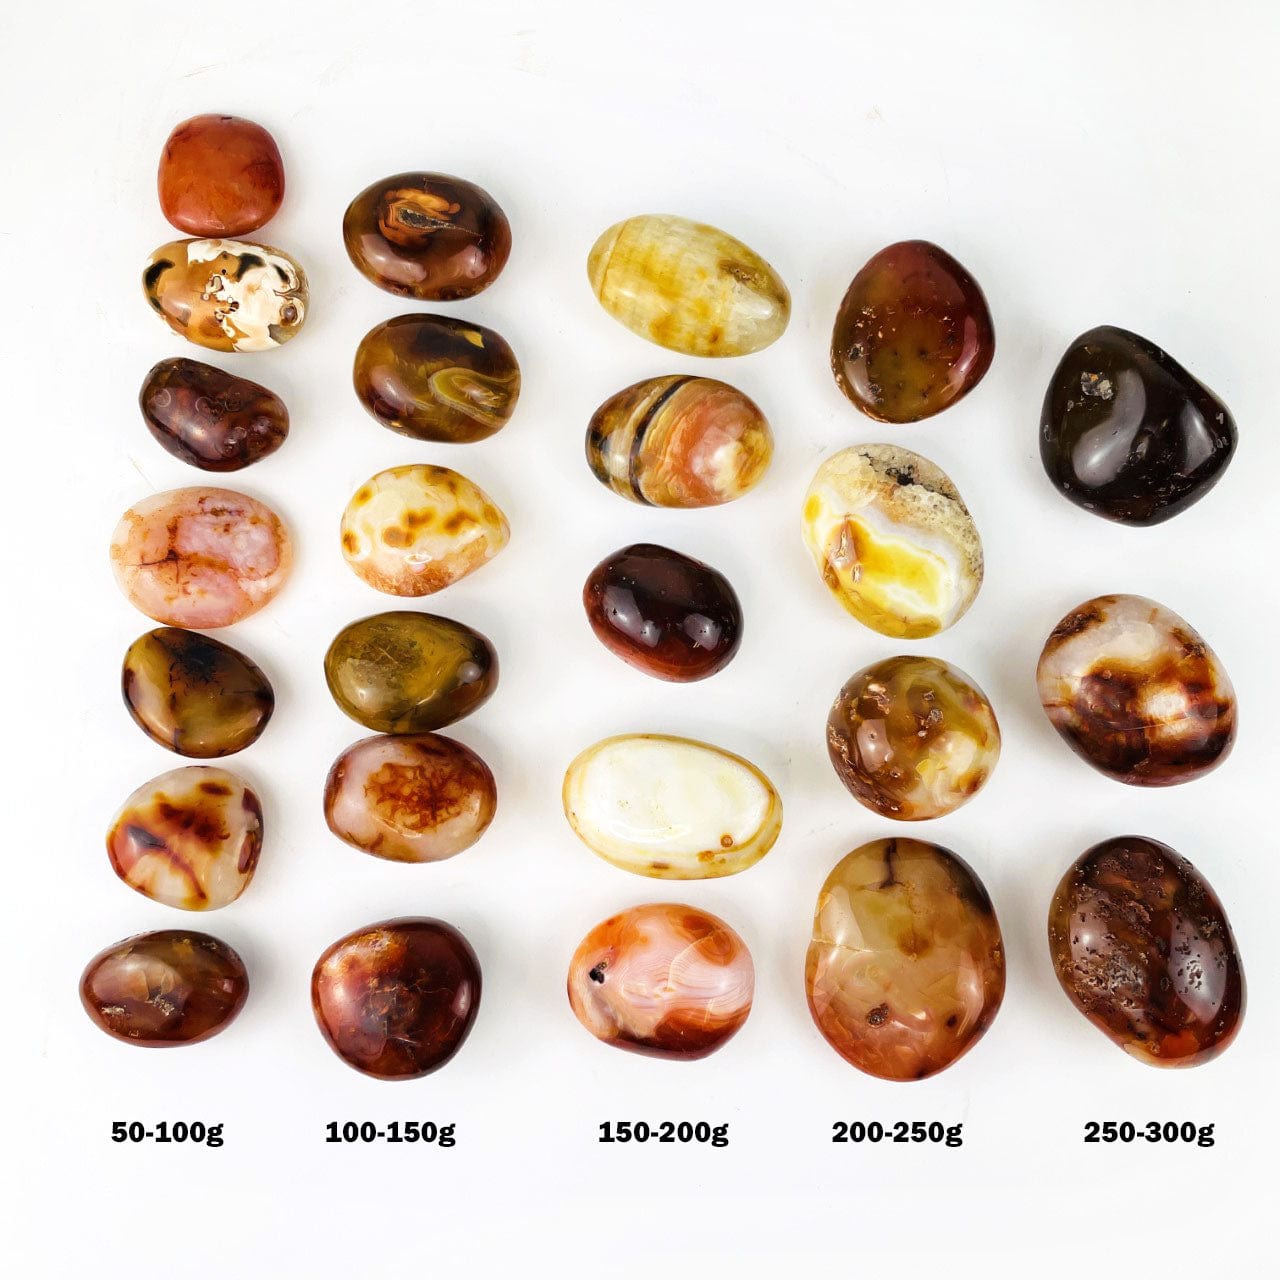 Carnelian Agate Tumbled Stones in rows showing size and color variations, type calling out sizes